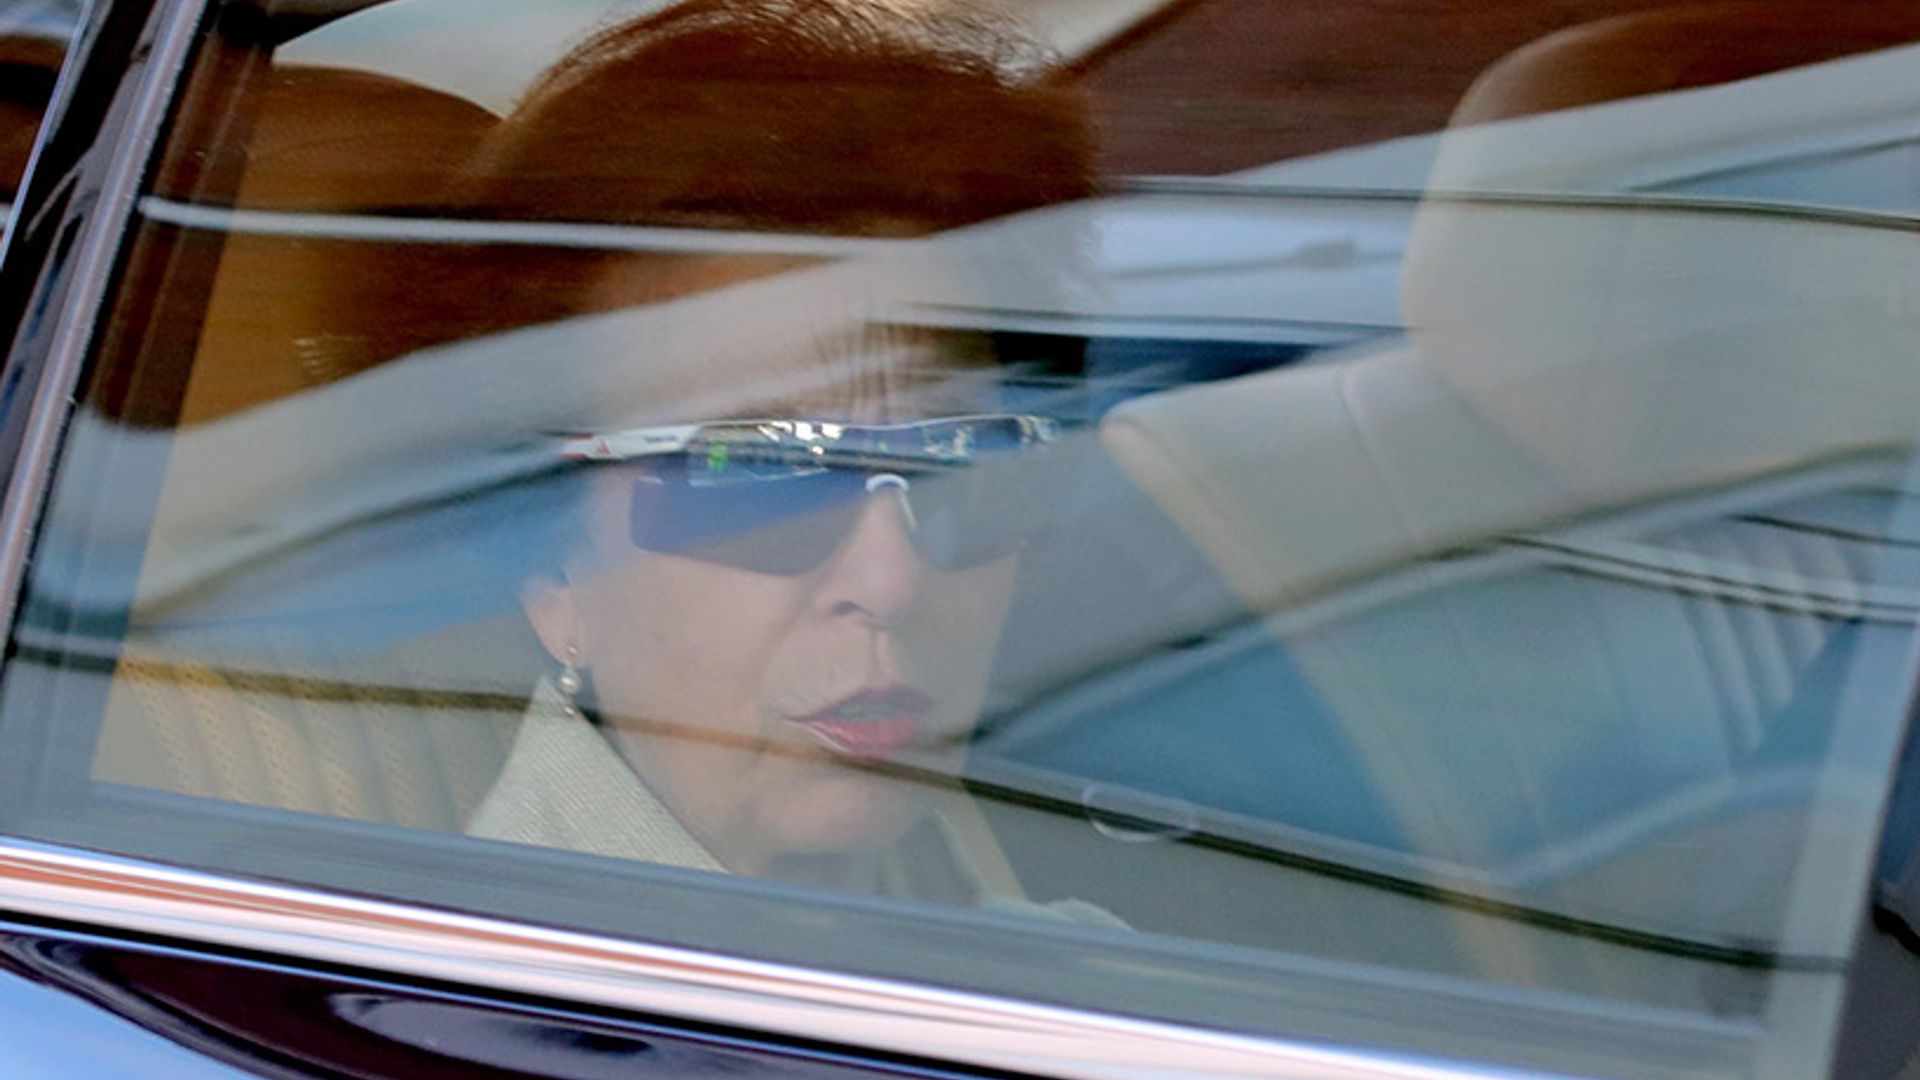 Princess Anne just rocked matrix style sunglasses and now she's our new style queen